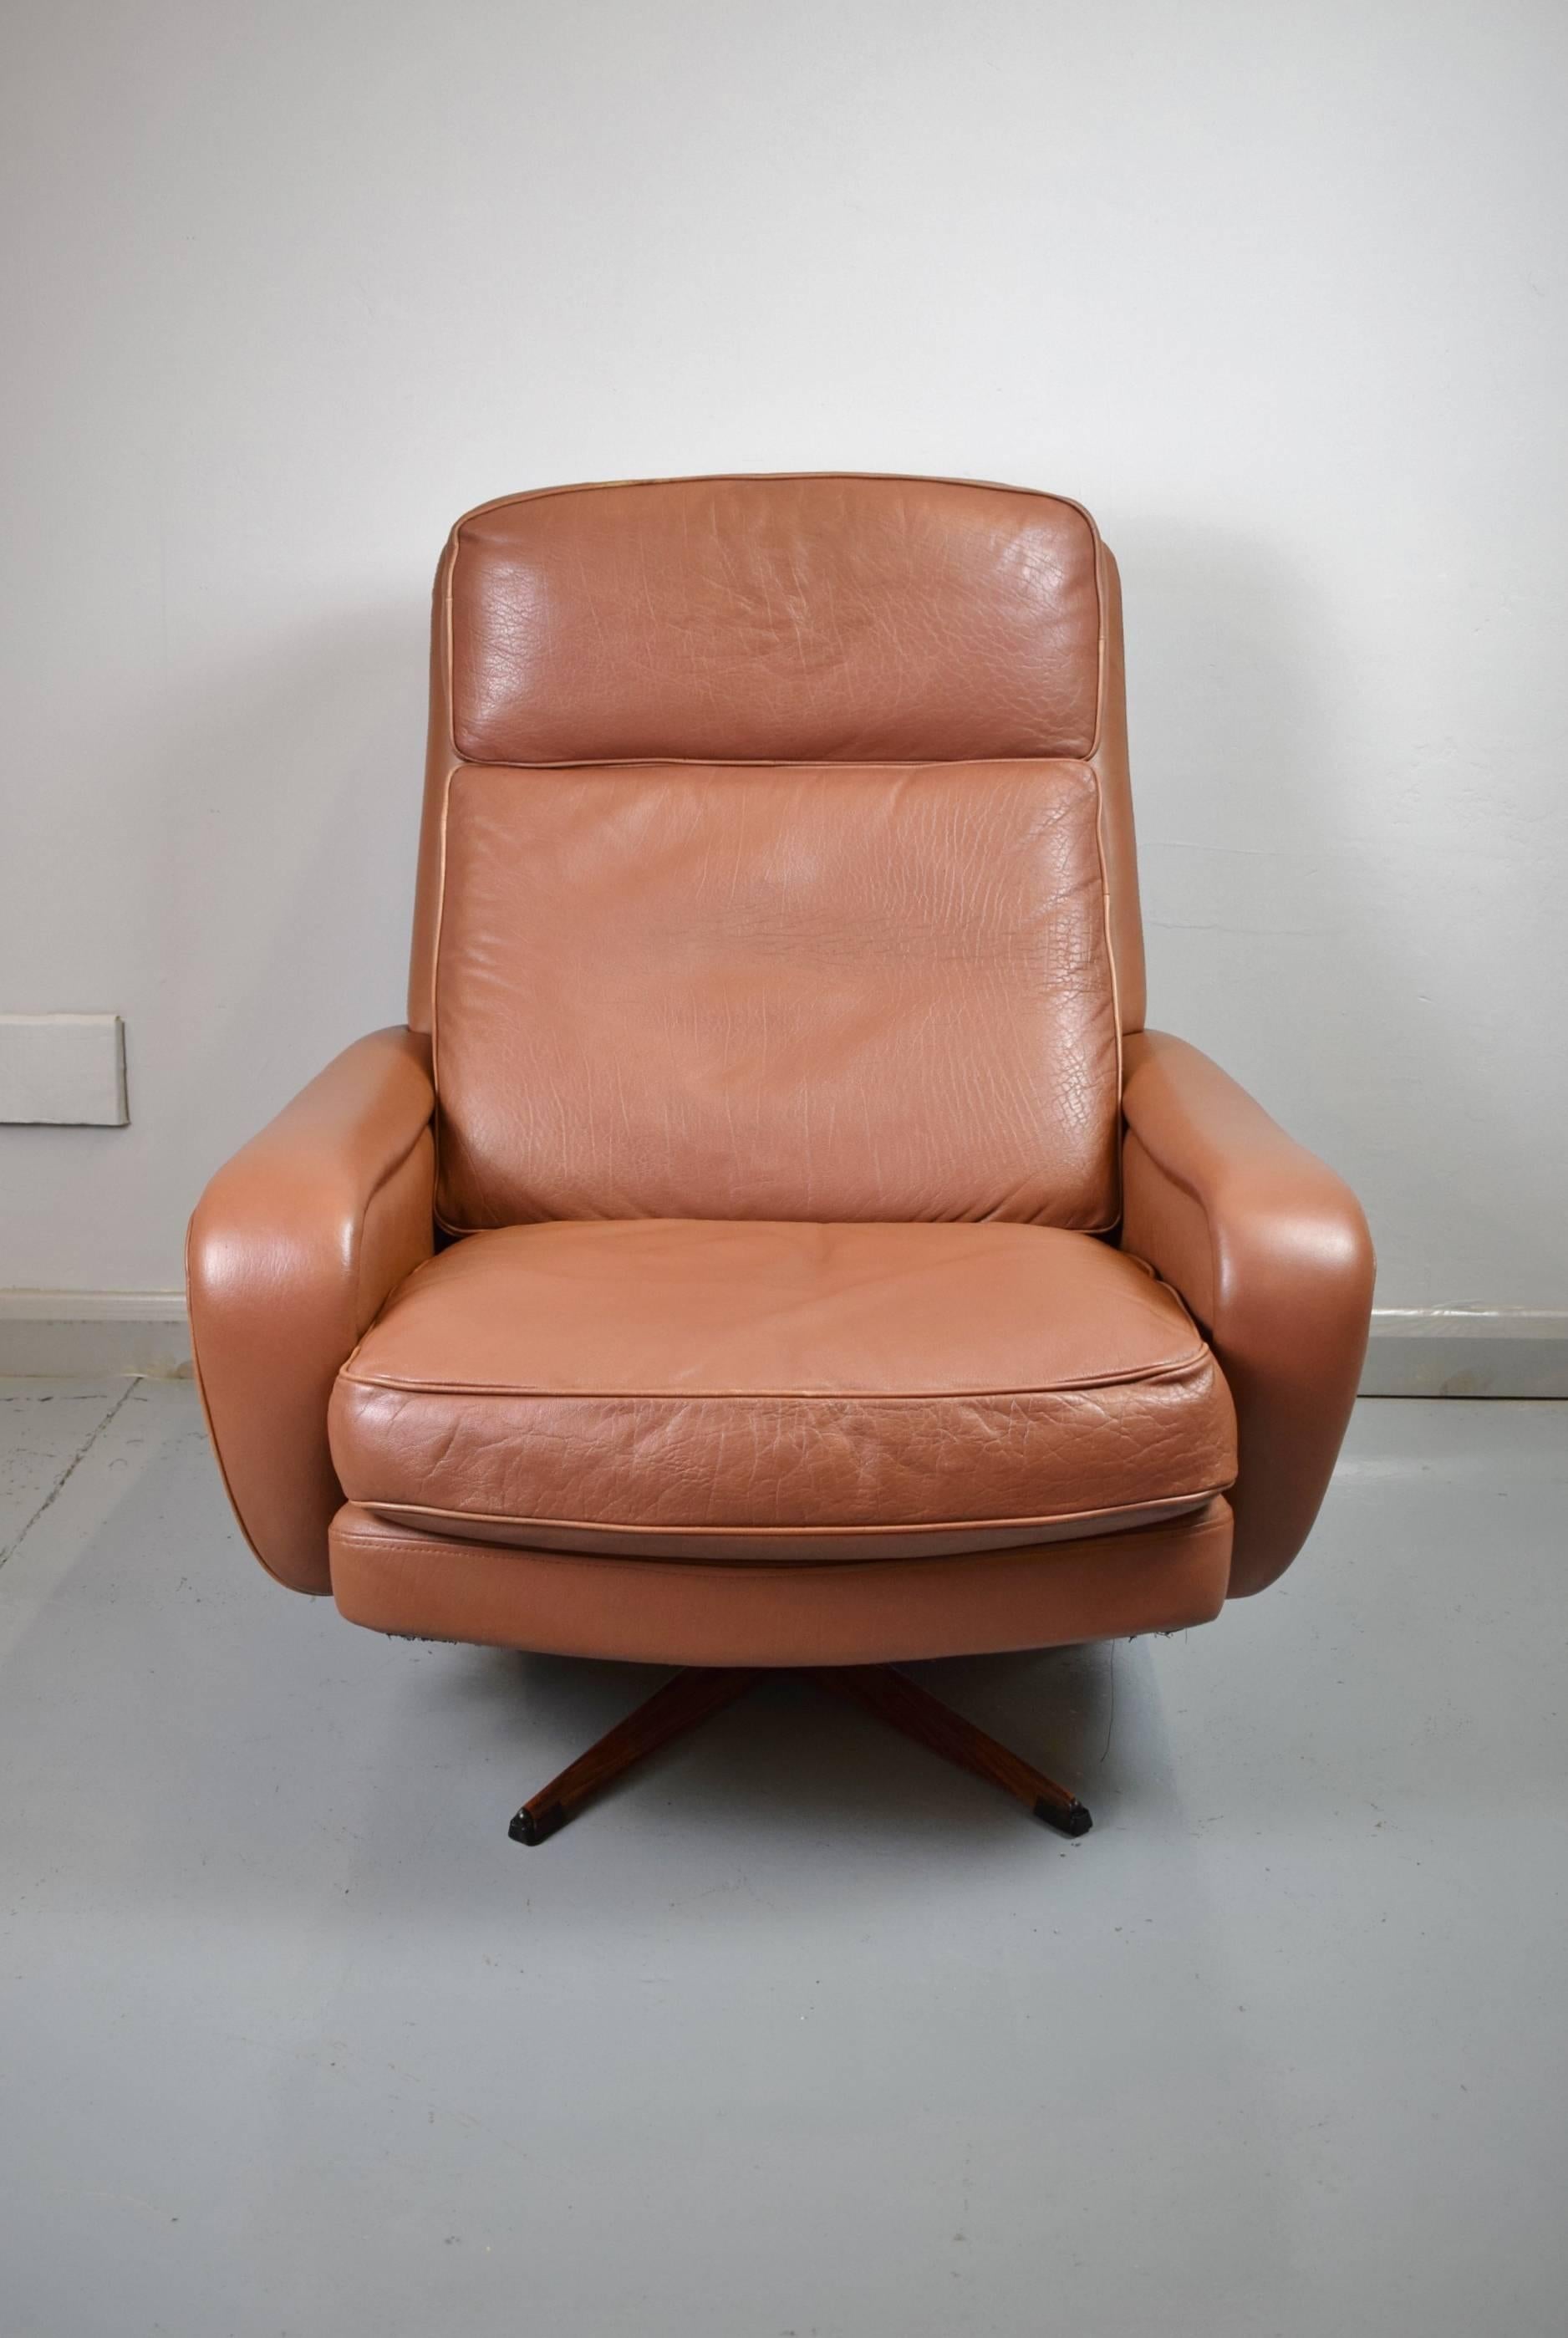 Designer: Georg Thams

Manufacturer: Vatne Mobler

Country: Denmark

Date: 1970s

Material: Leather Rosewood effect base.

Maximum Dimensions: 80cm wide, 90cm deep, and 93cm tall.
?Seat height is 40cm.

Condition: Excellent no rips or